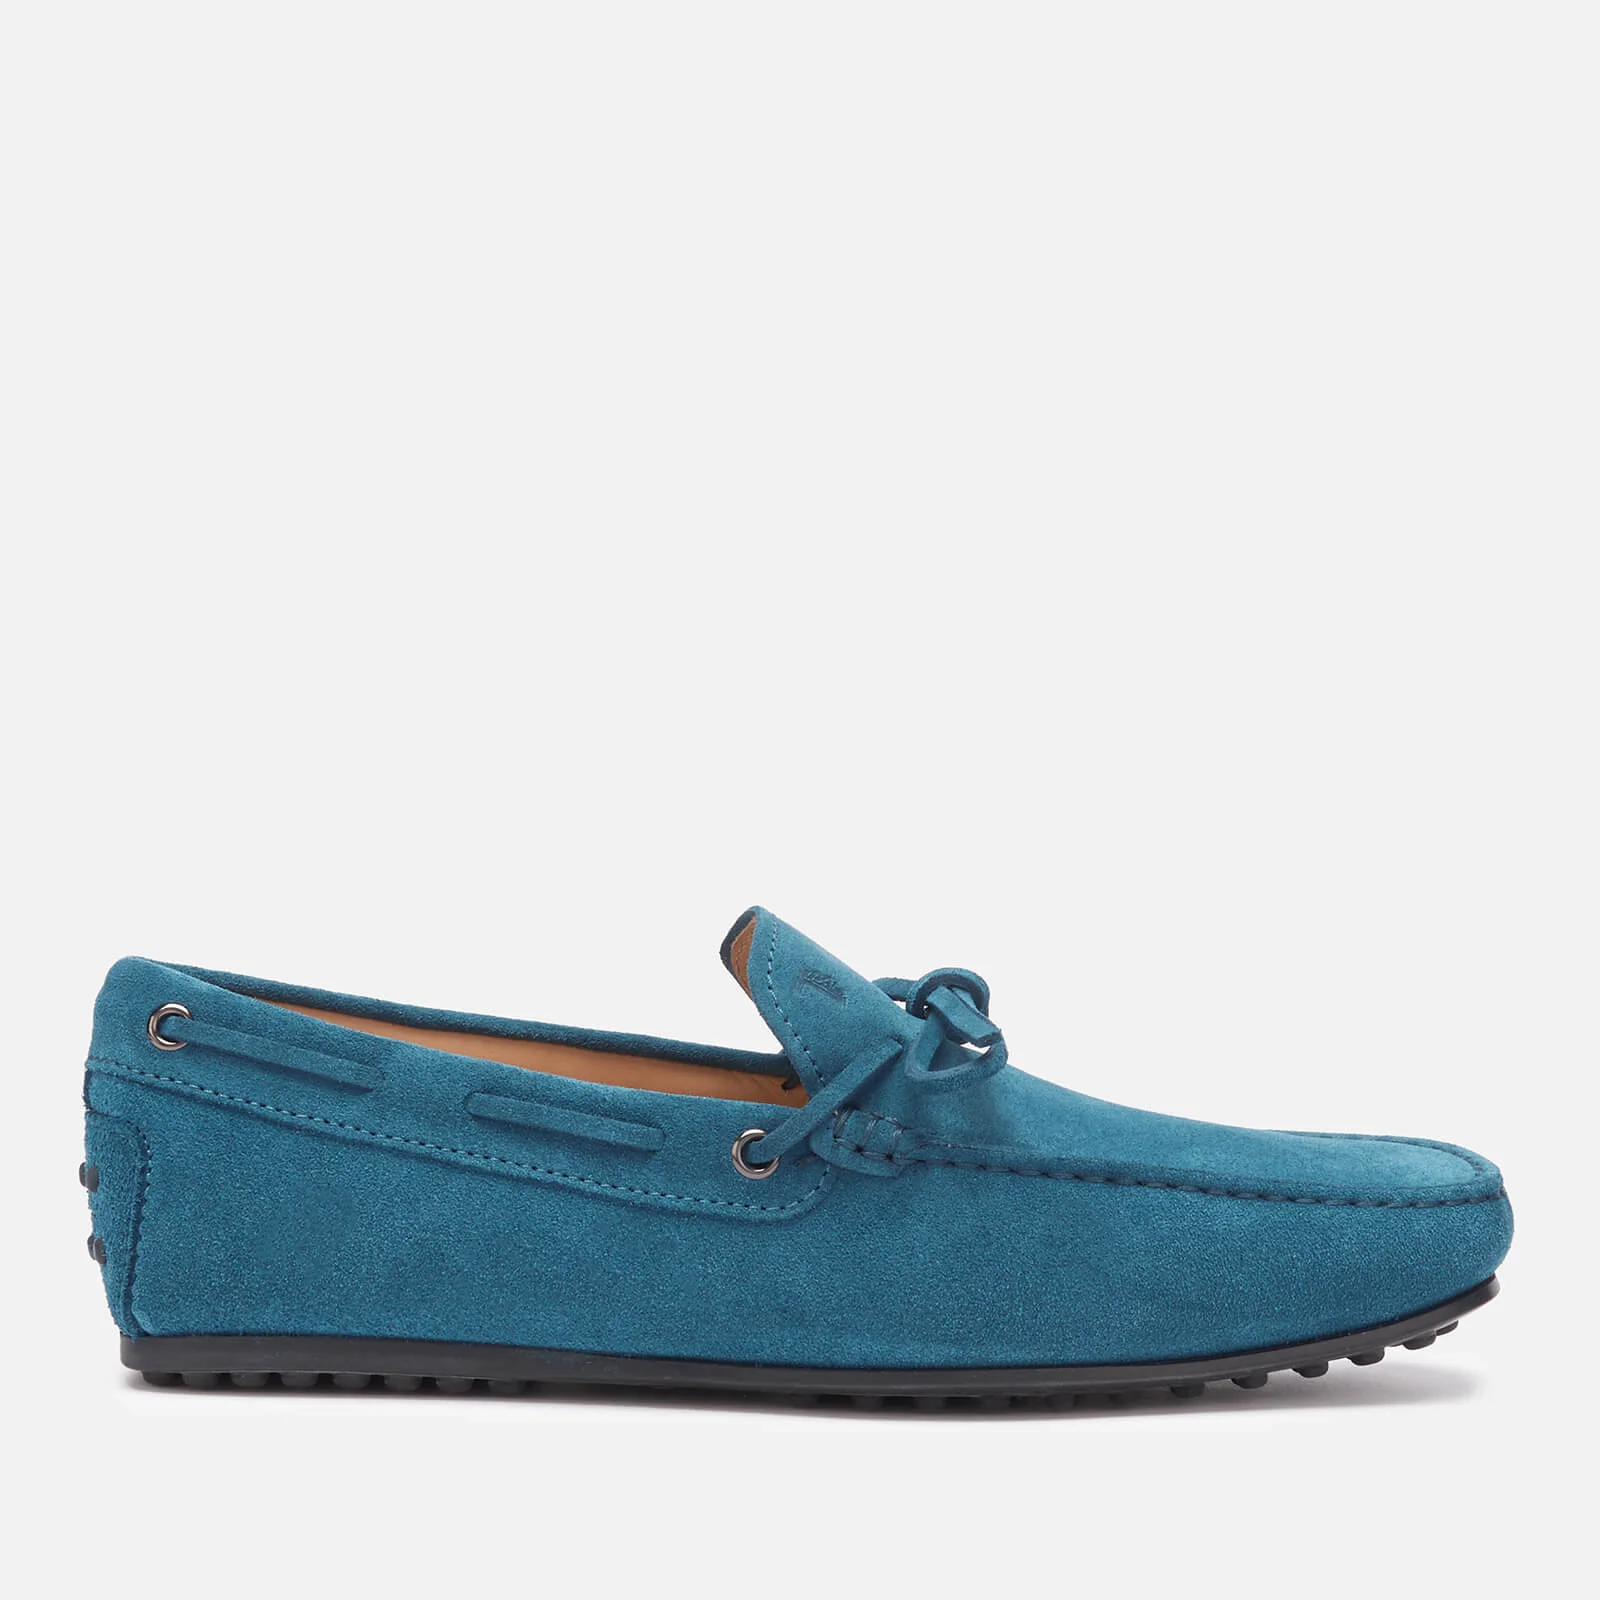 Tod's Men's Suede City Gommino Driving Shoes - Blue Image 1